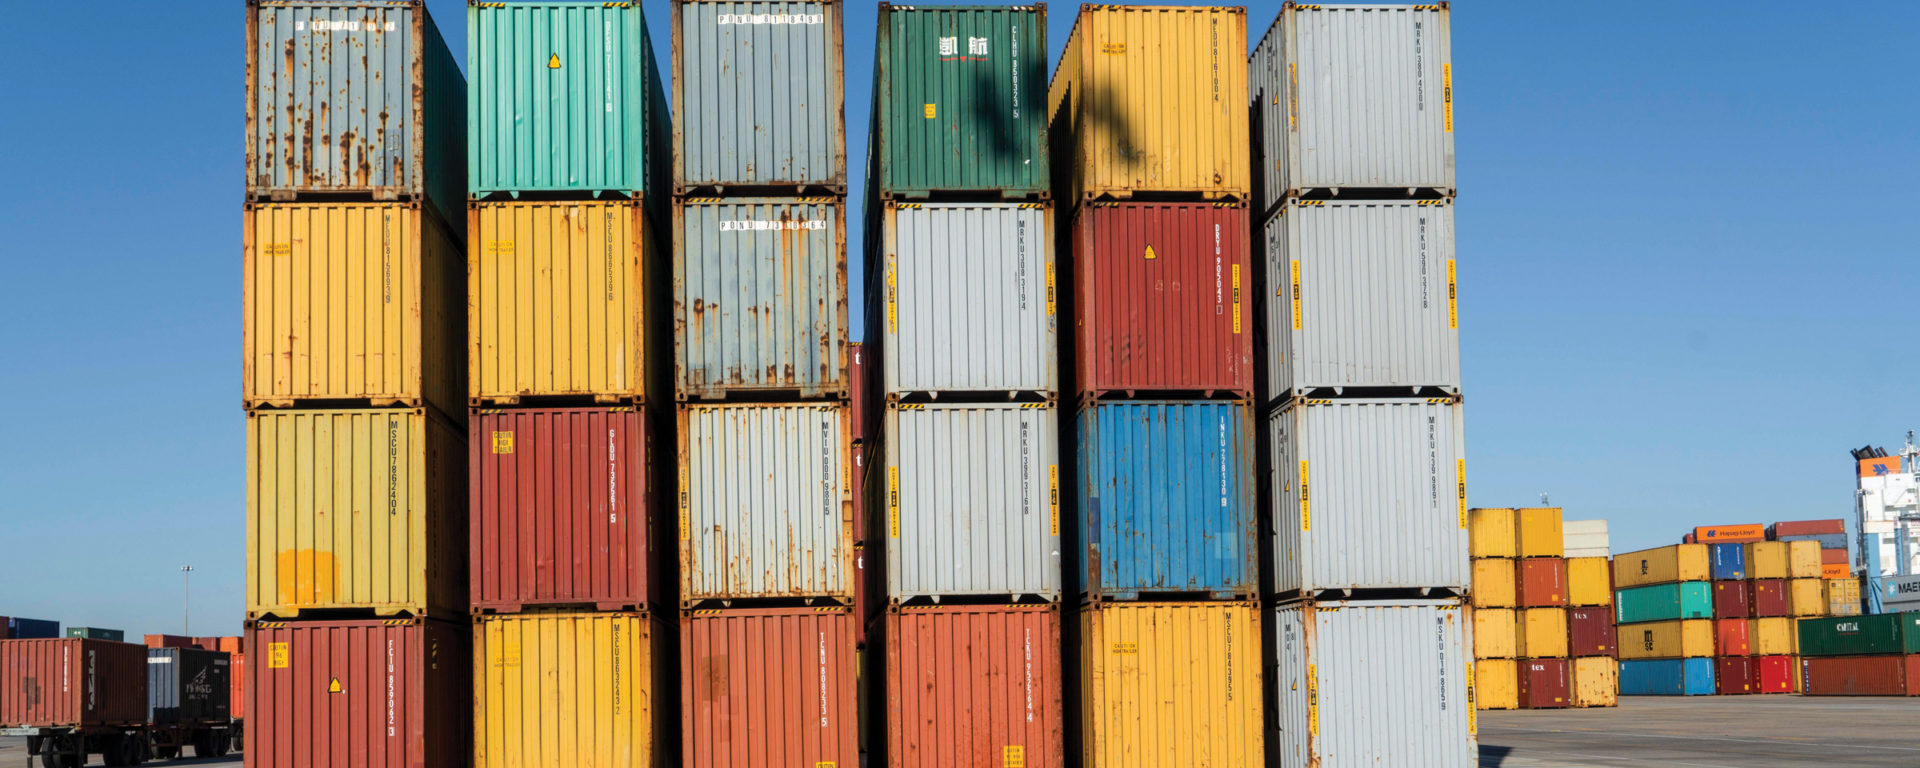 Shipping continers arranged in a colorful grid